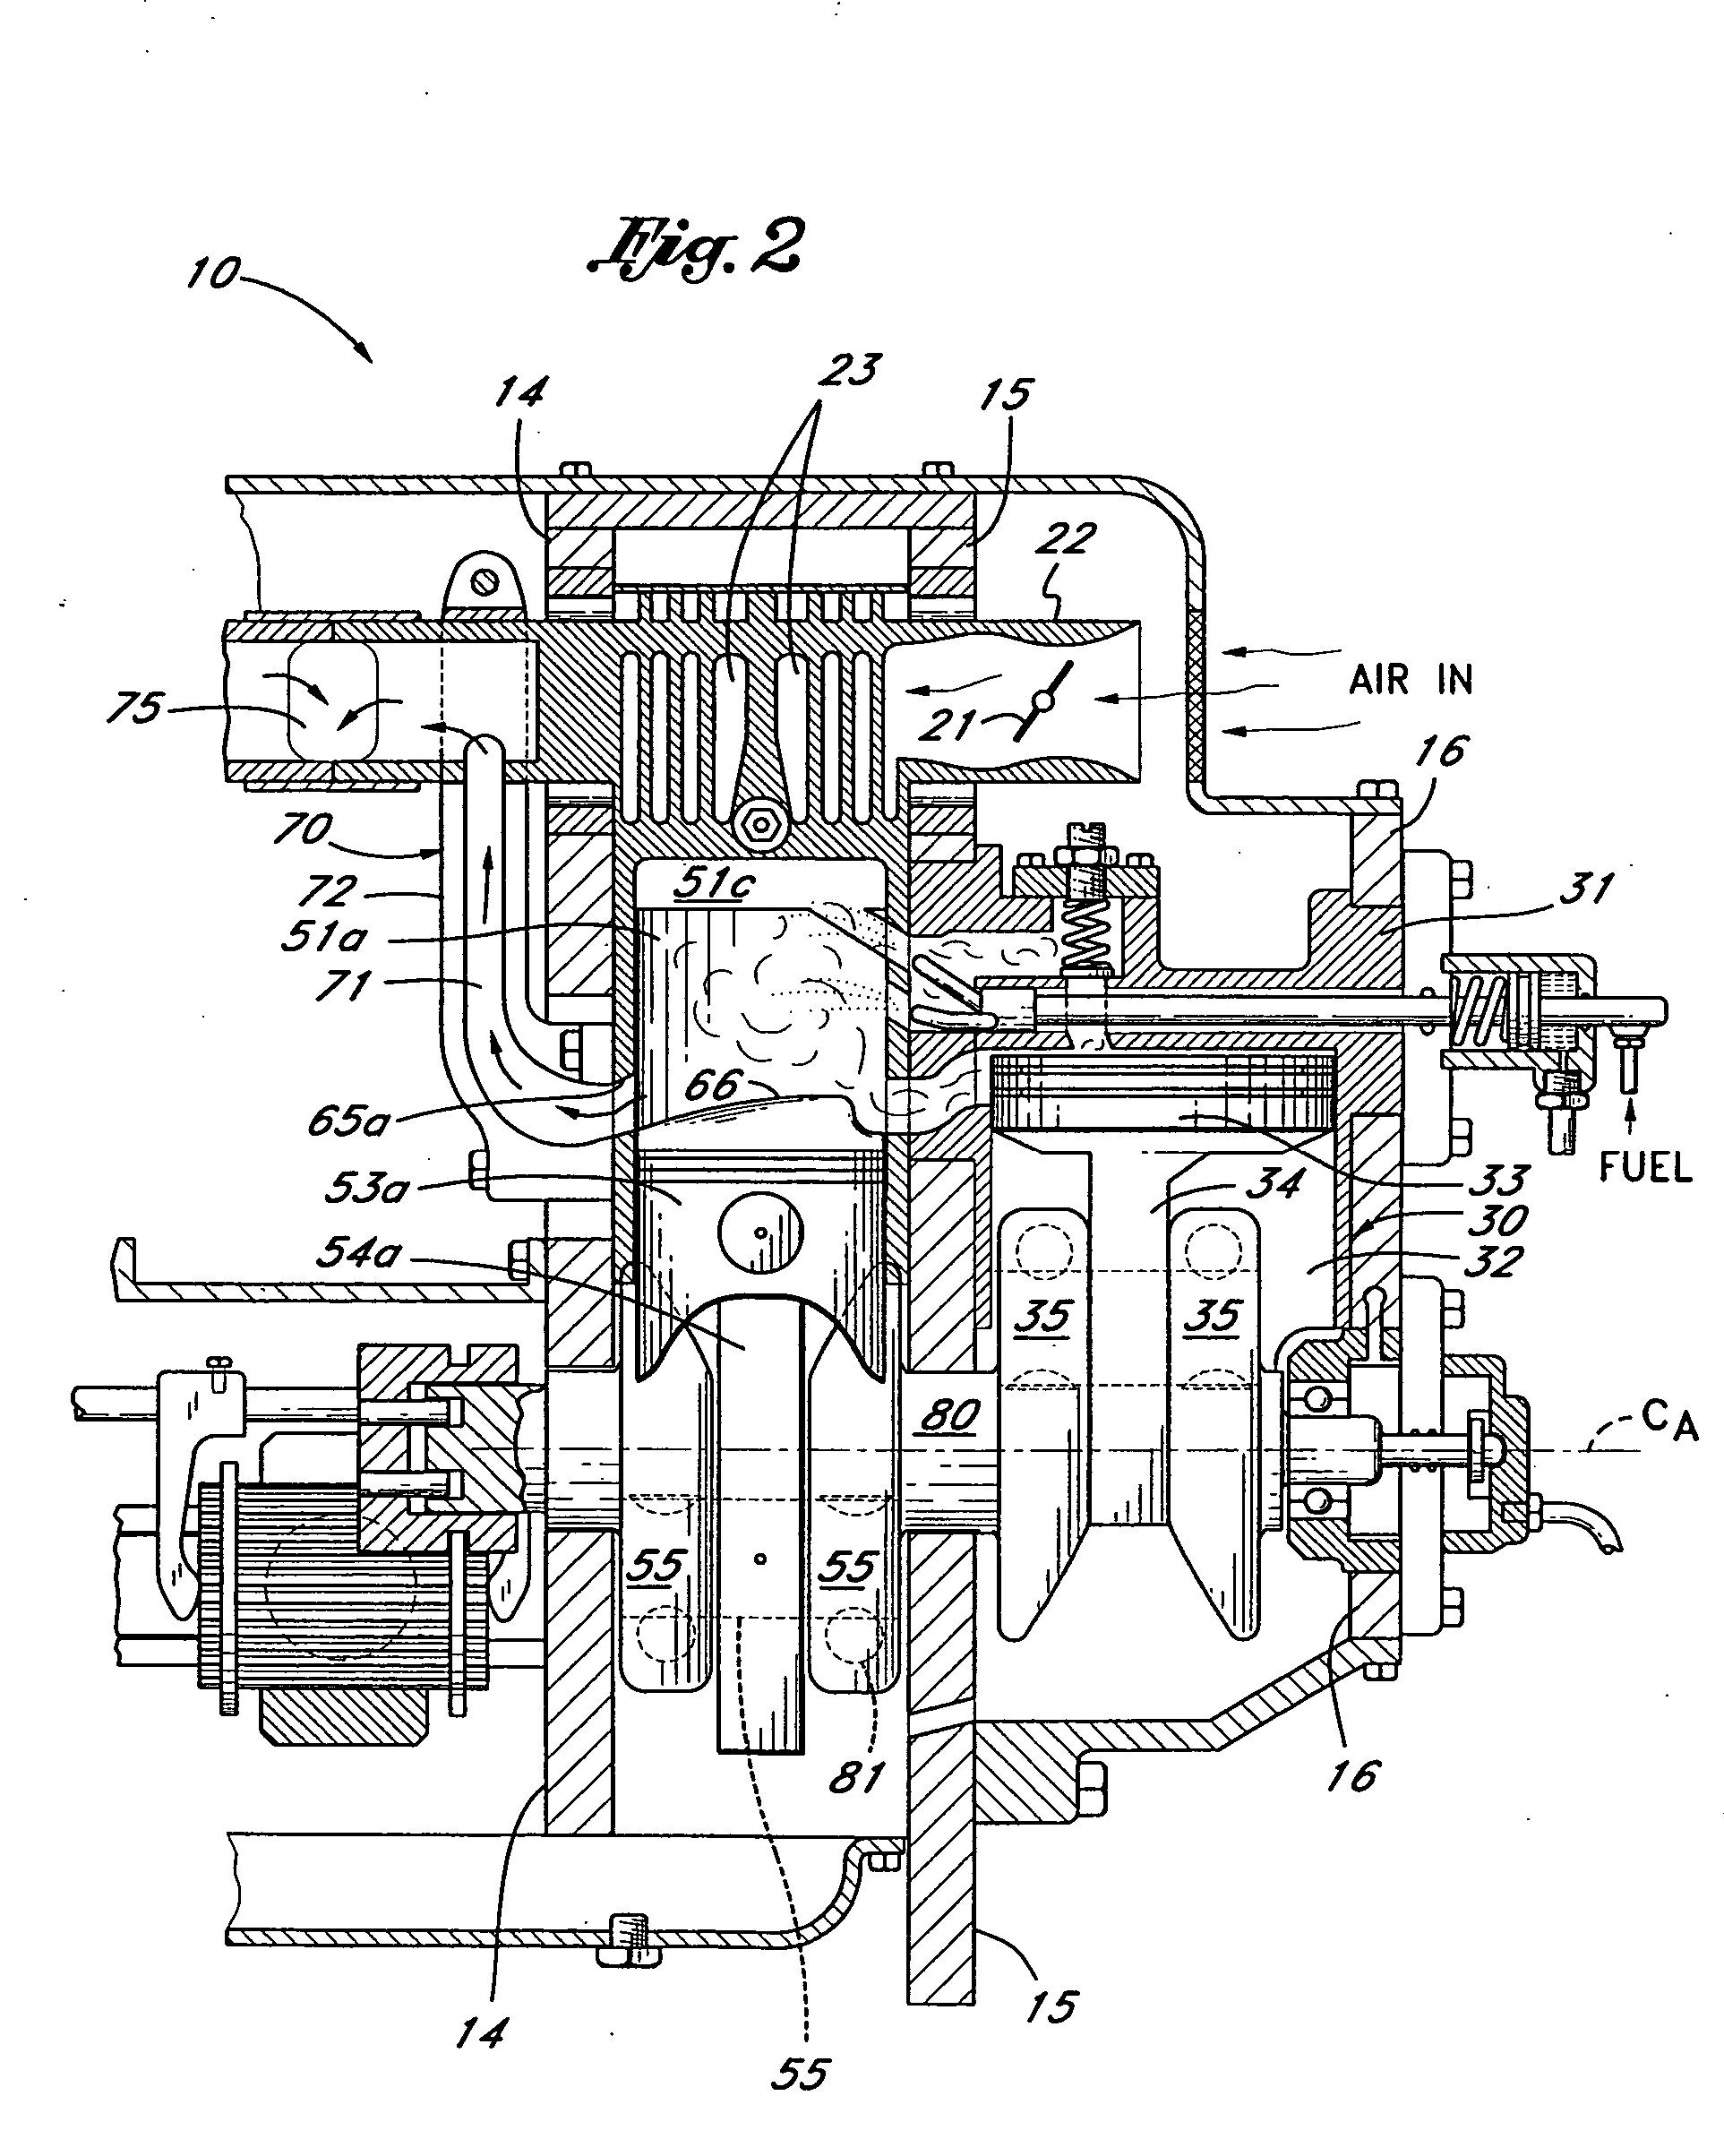 Internal combustion engine with actuating oscillating cylinders